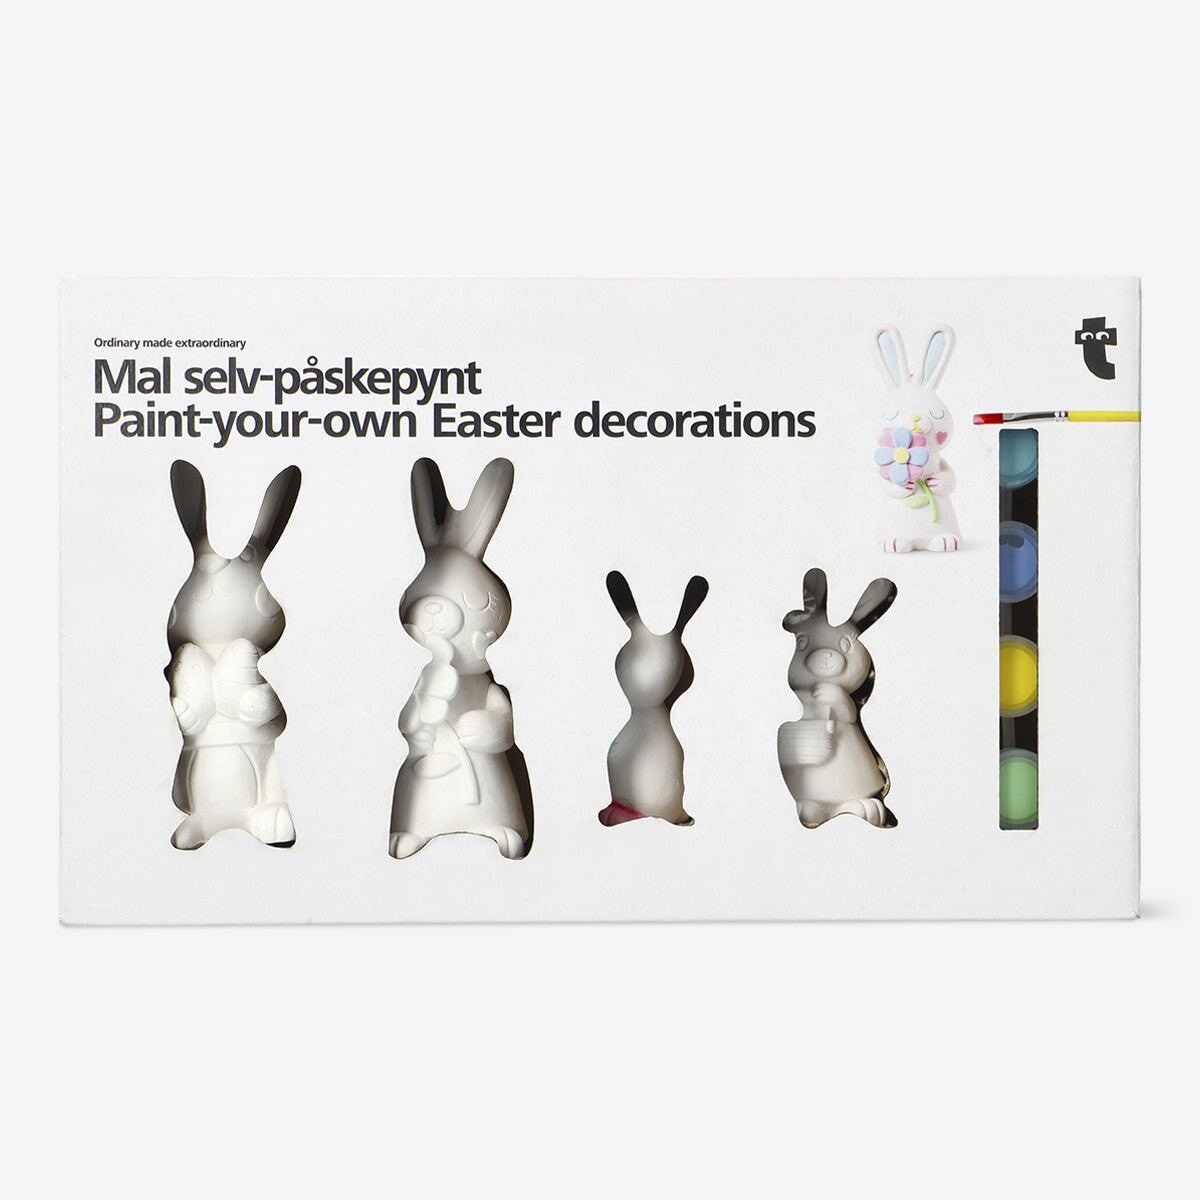 Paint-your-own Easter decorations Hobby Flying Tiger Copenhagen 